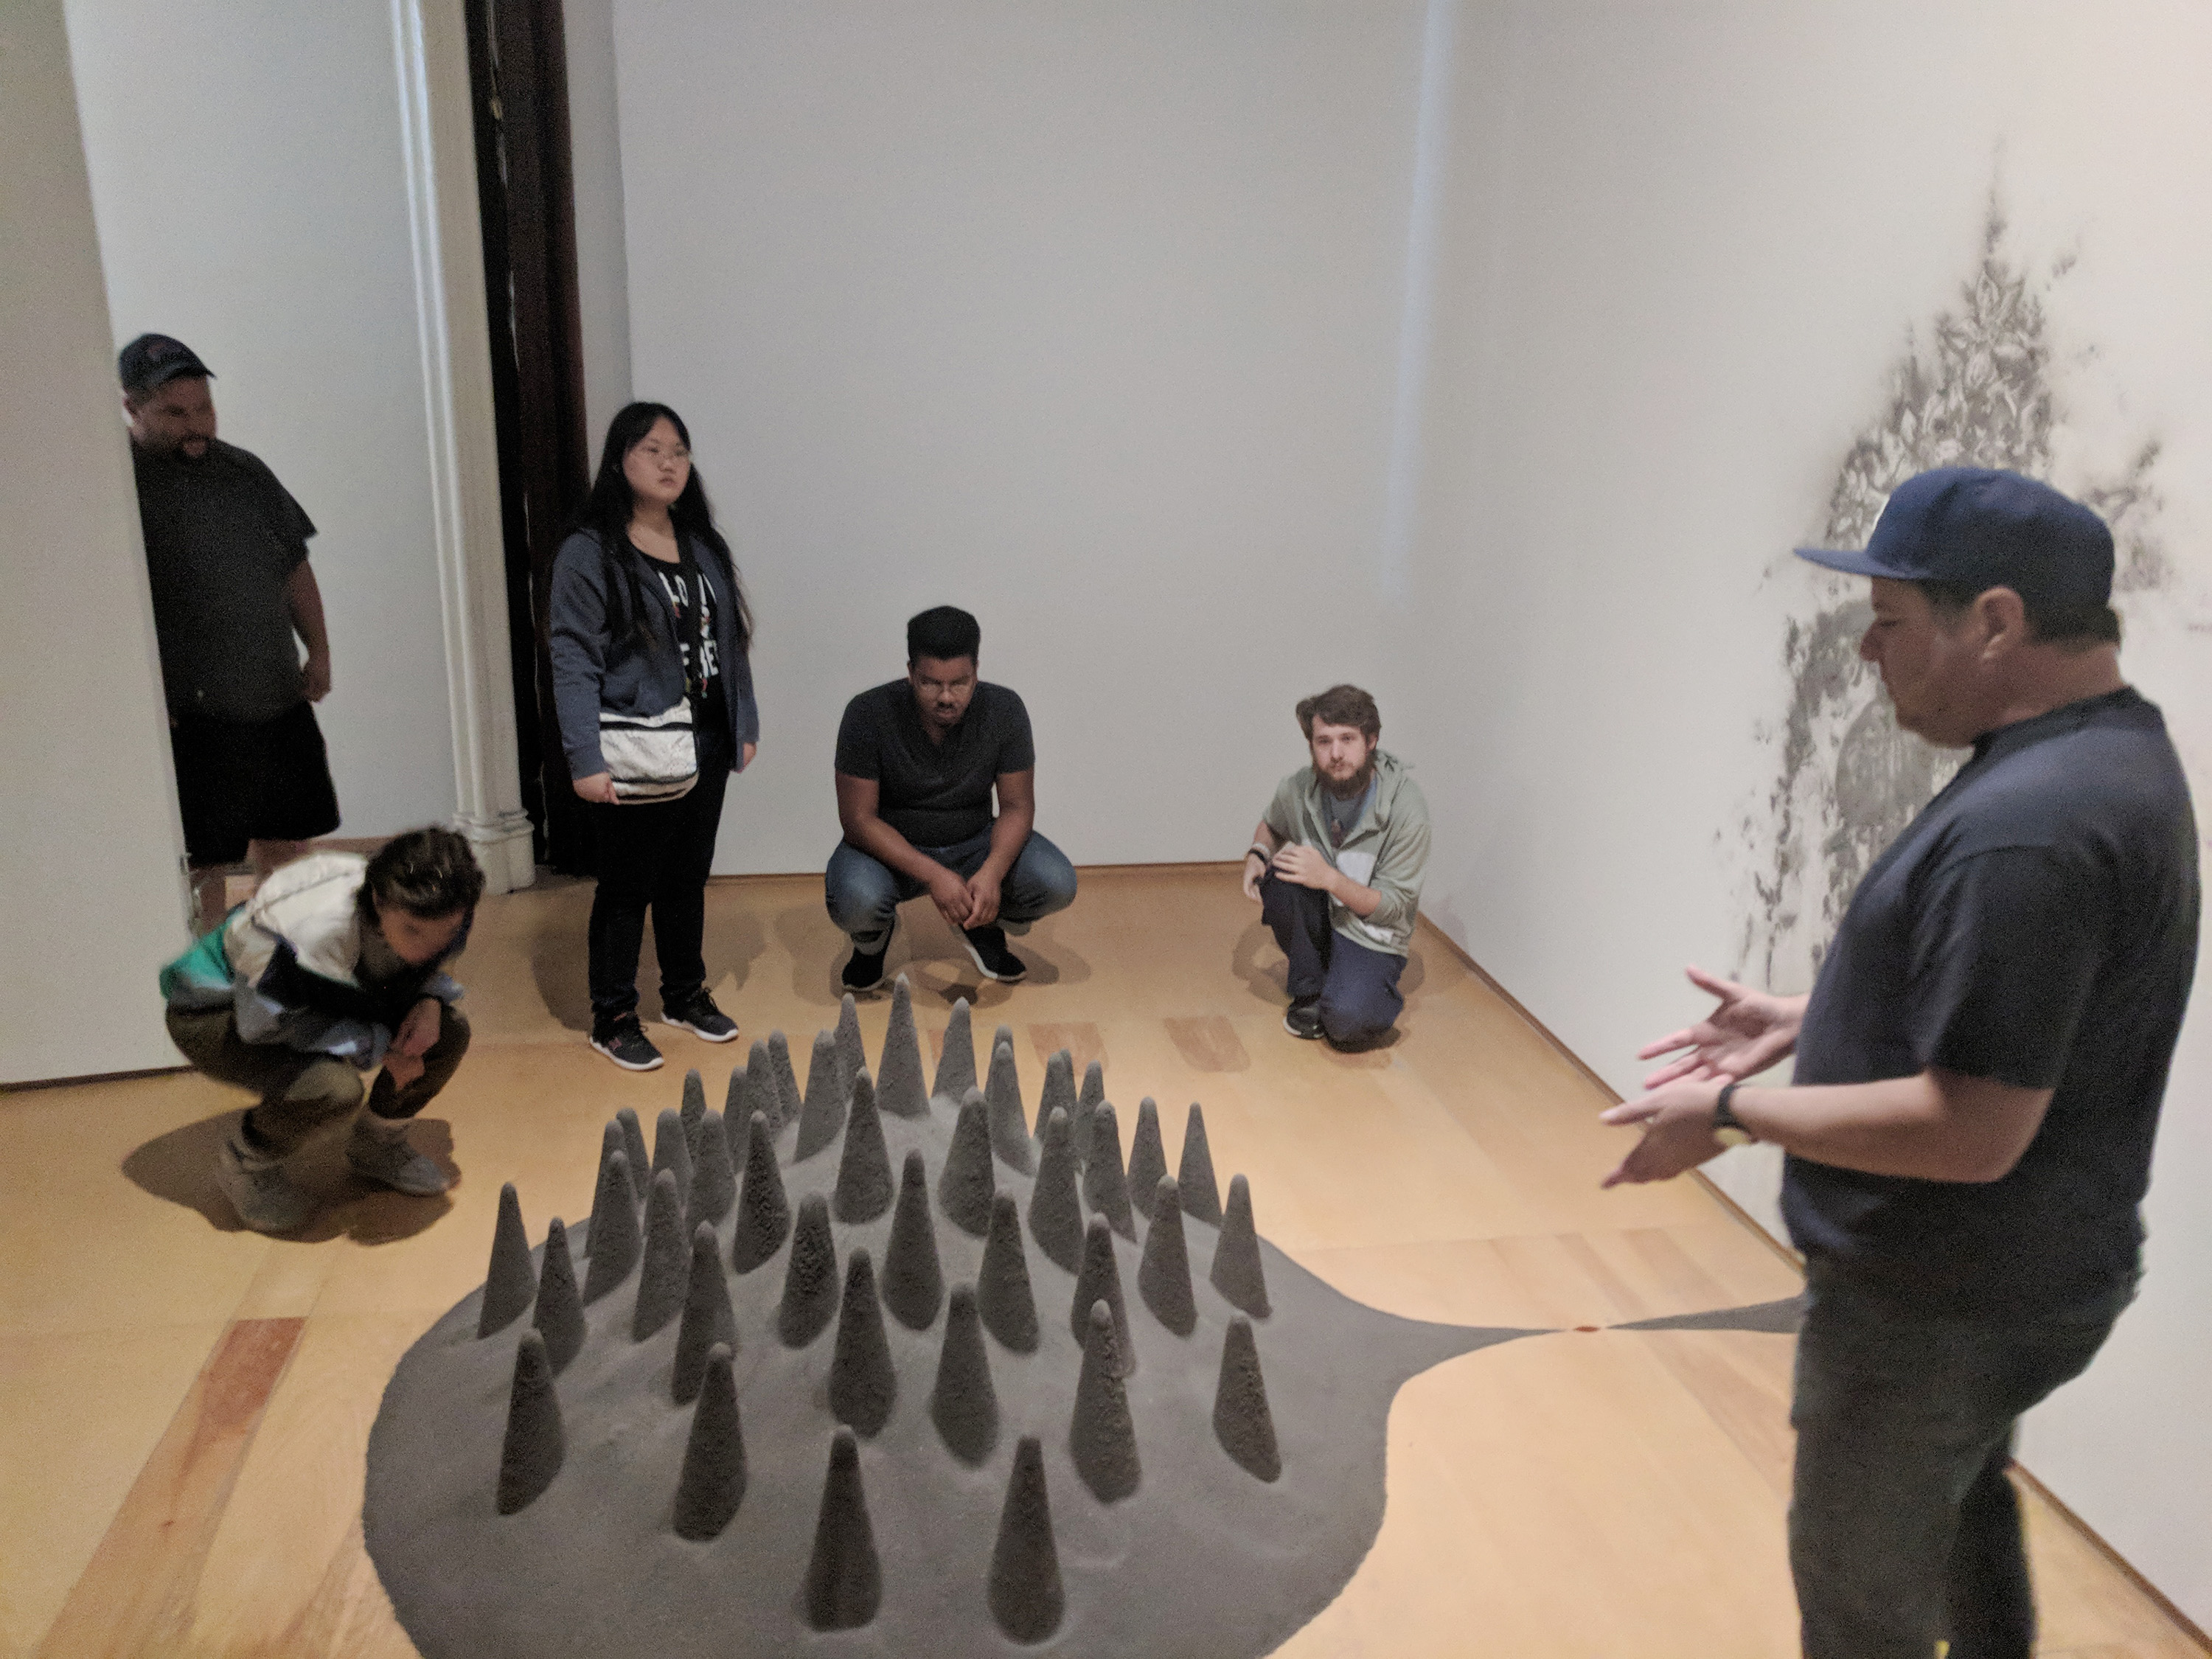 Students kneel to get a closer look at an art installation.